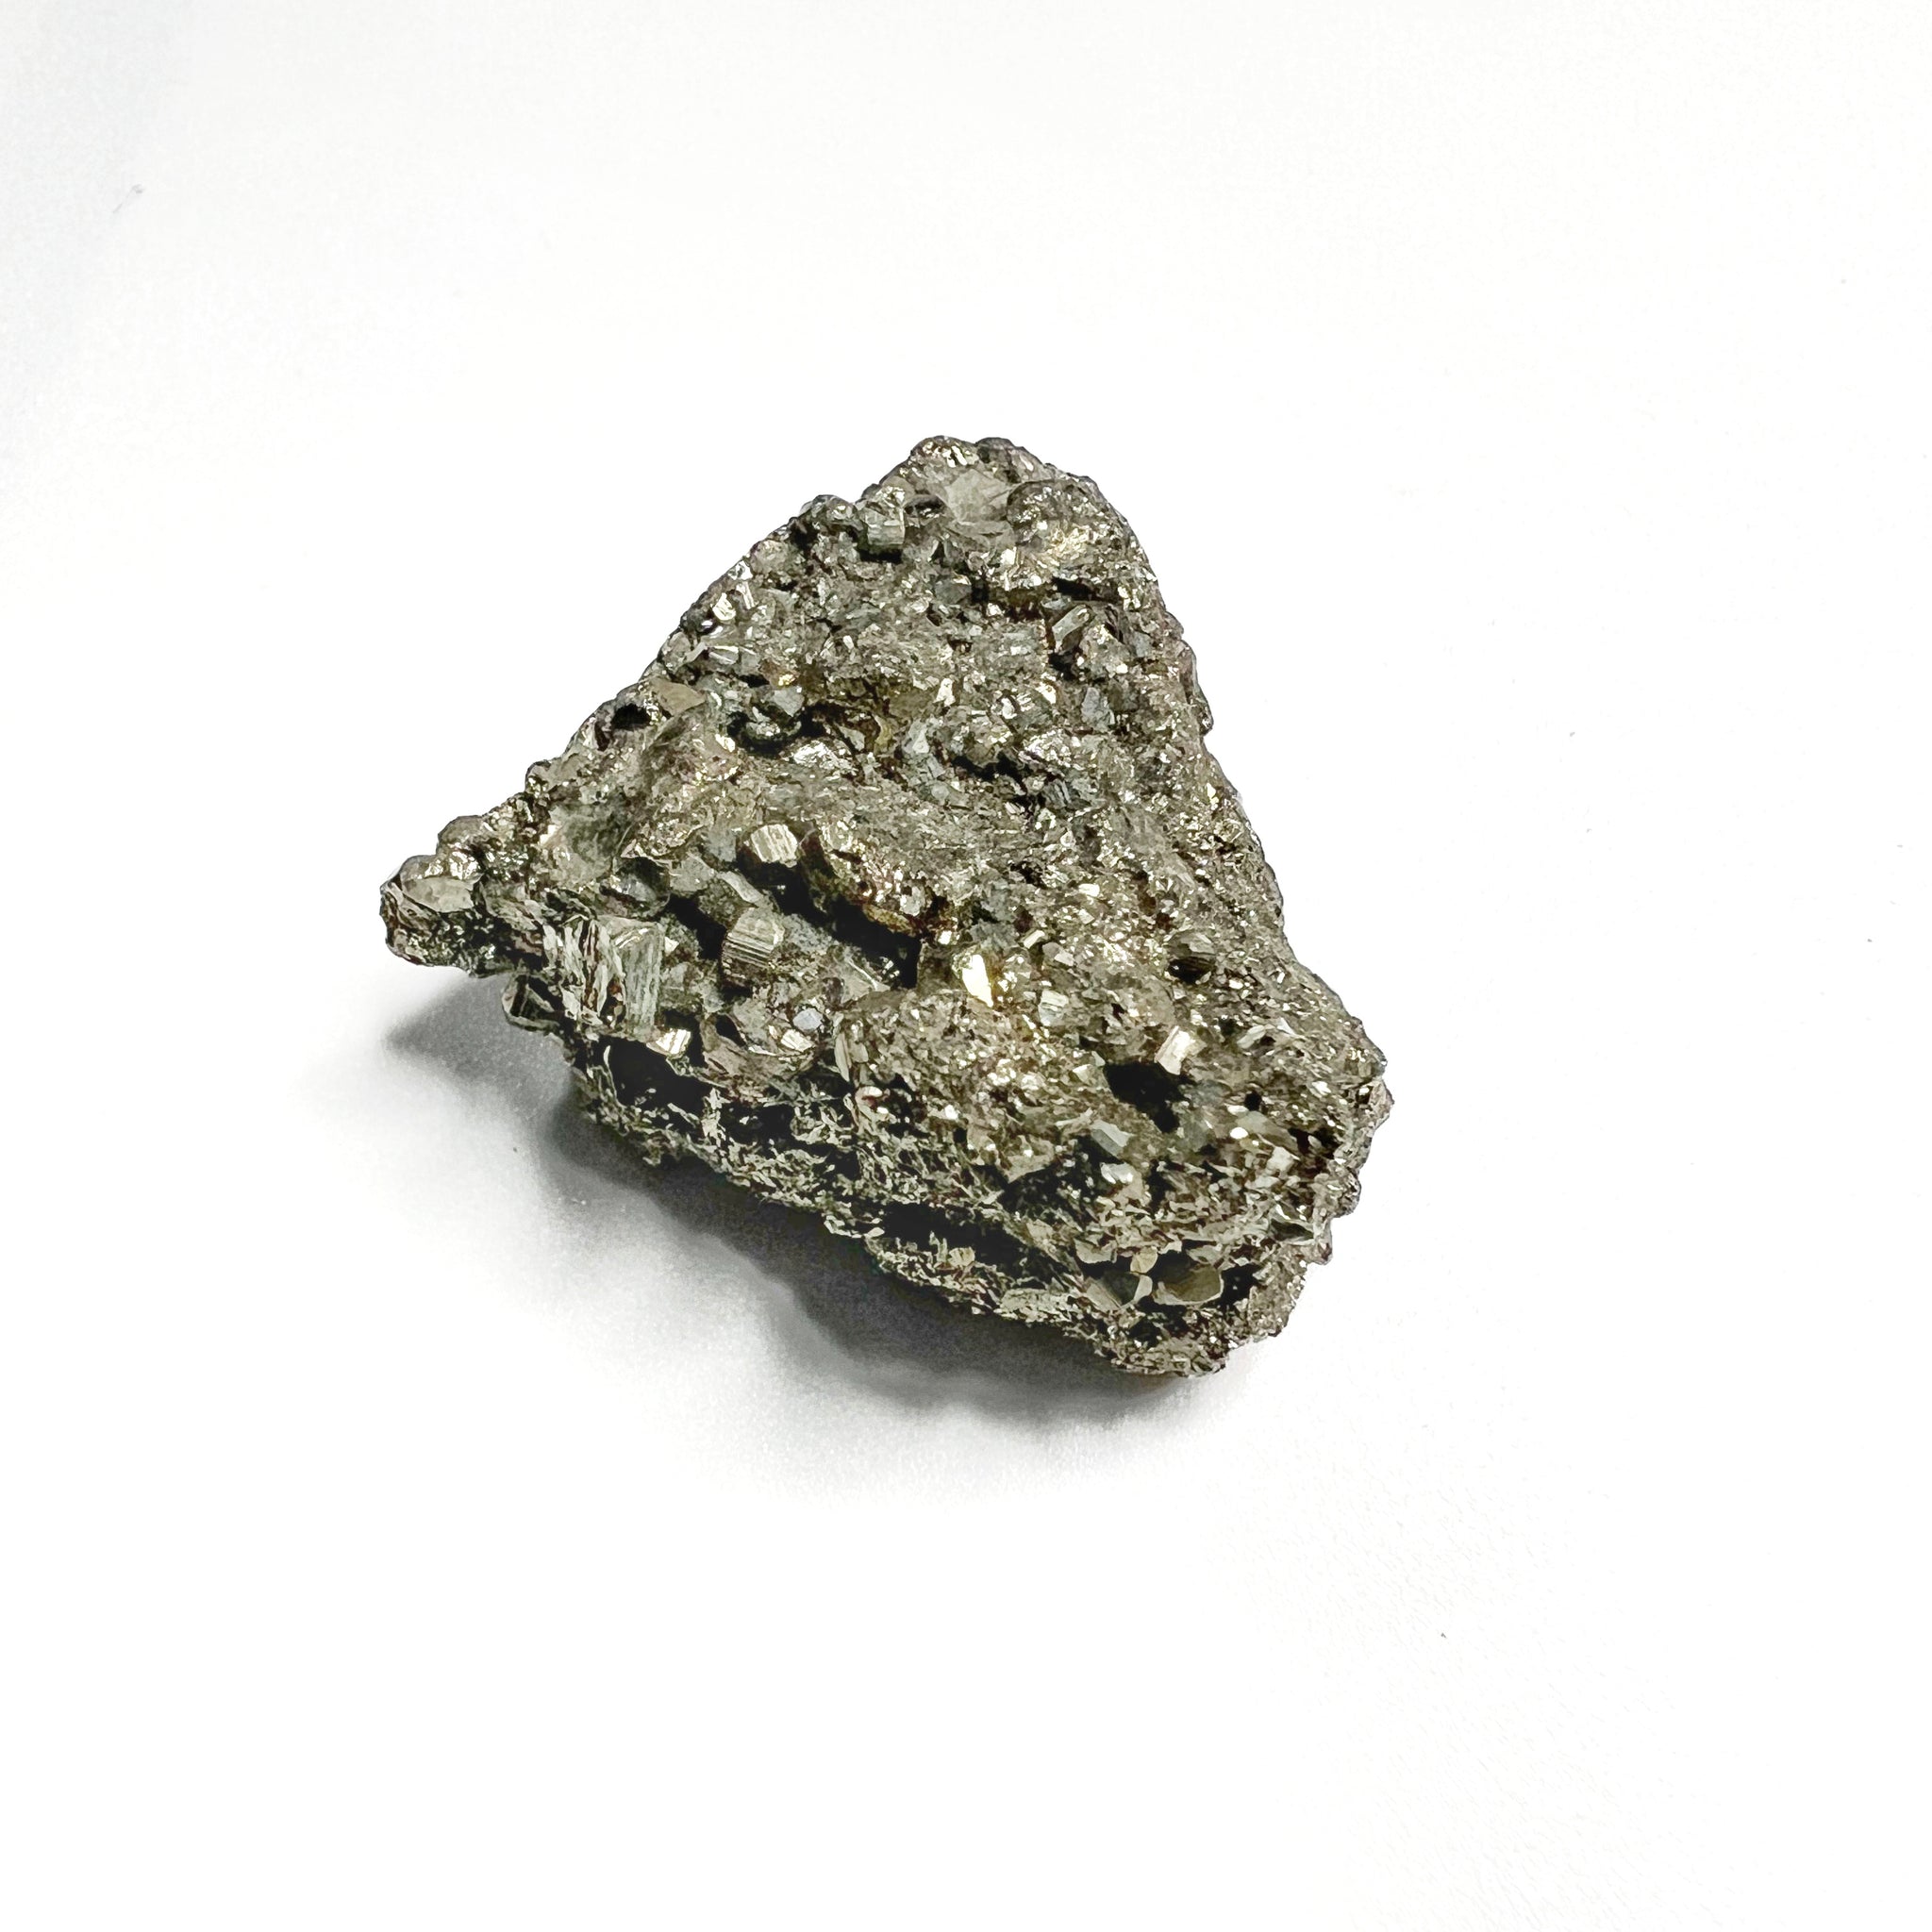 CERTIFIED NATURAL PYRITE  ROCK - SILVER BLACK SPARKLING COLOUR MEDITATION HEALING ACCESSORY HOME OFFICE GIFT